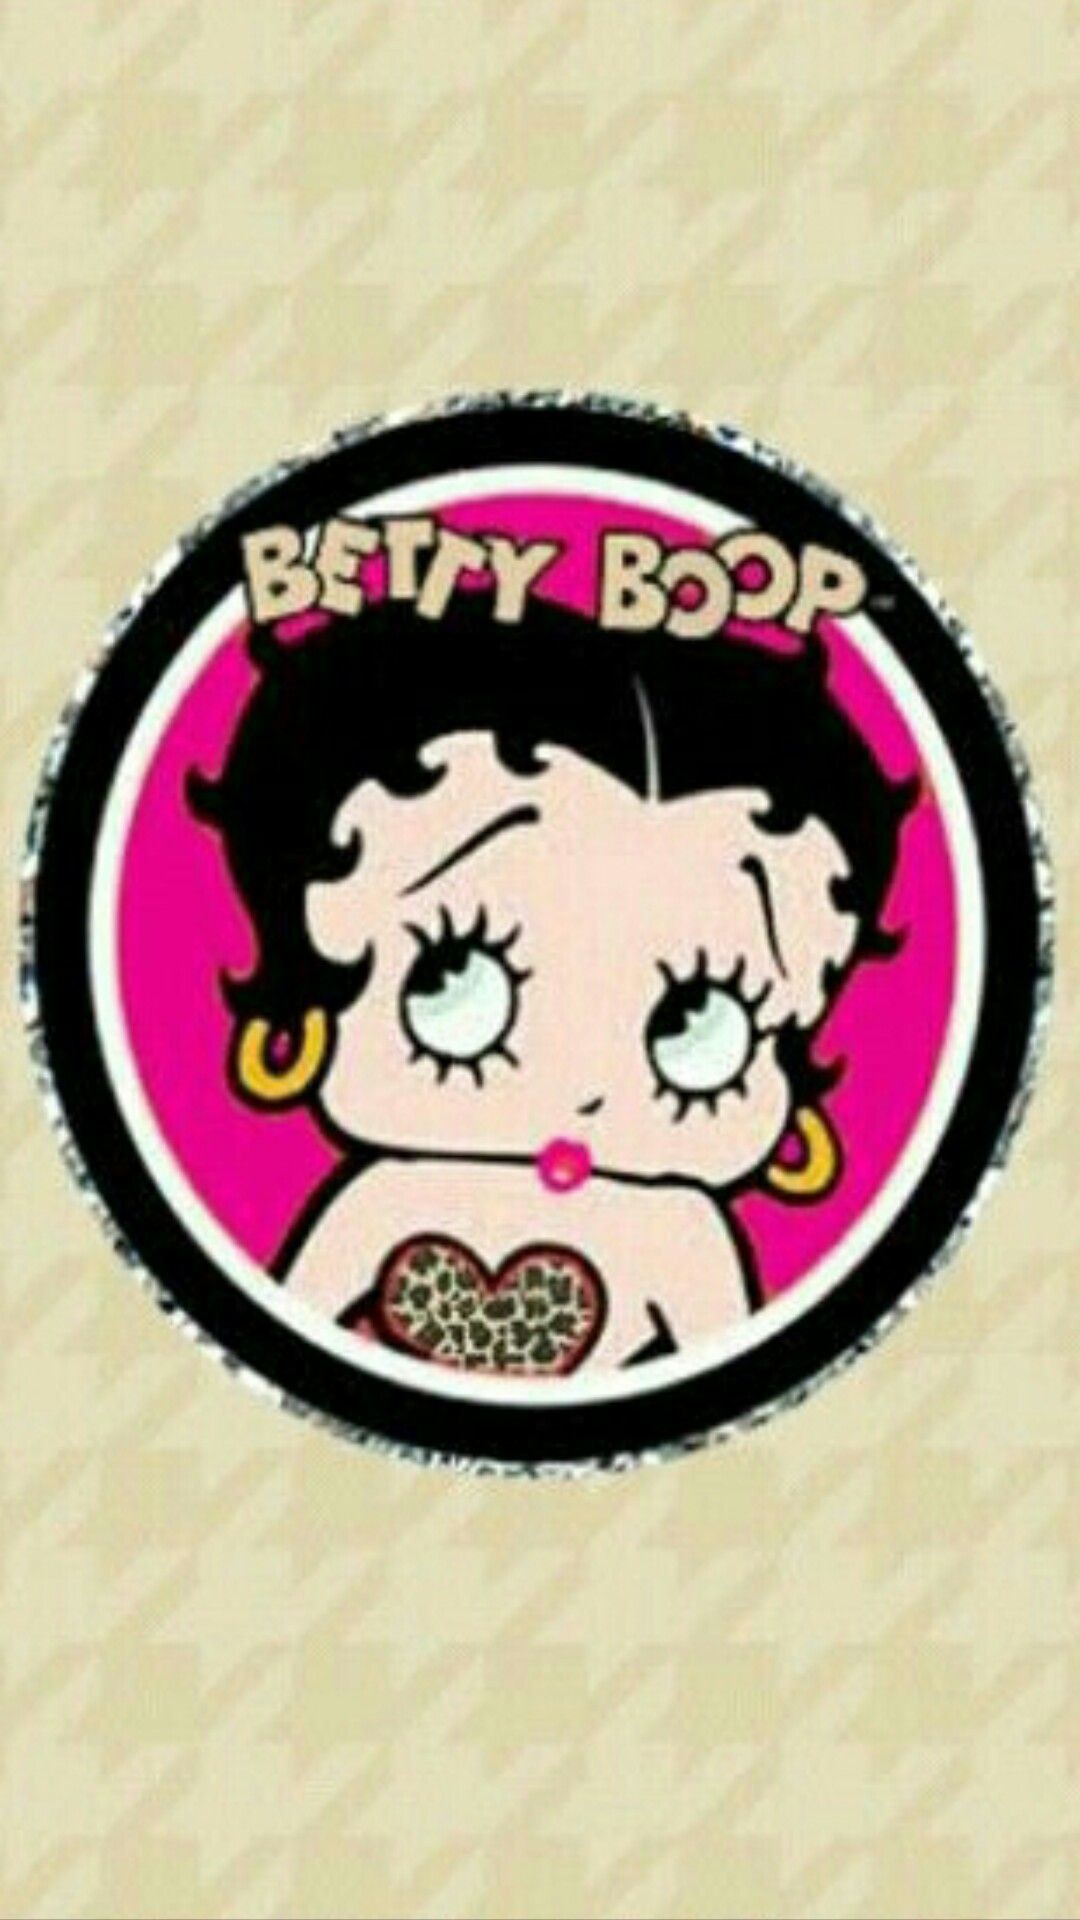 1080x1920 I Luv U, Betty Boop, Coloring Pages, Boobs, Wallpapers, Sweet Treats